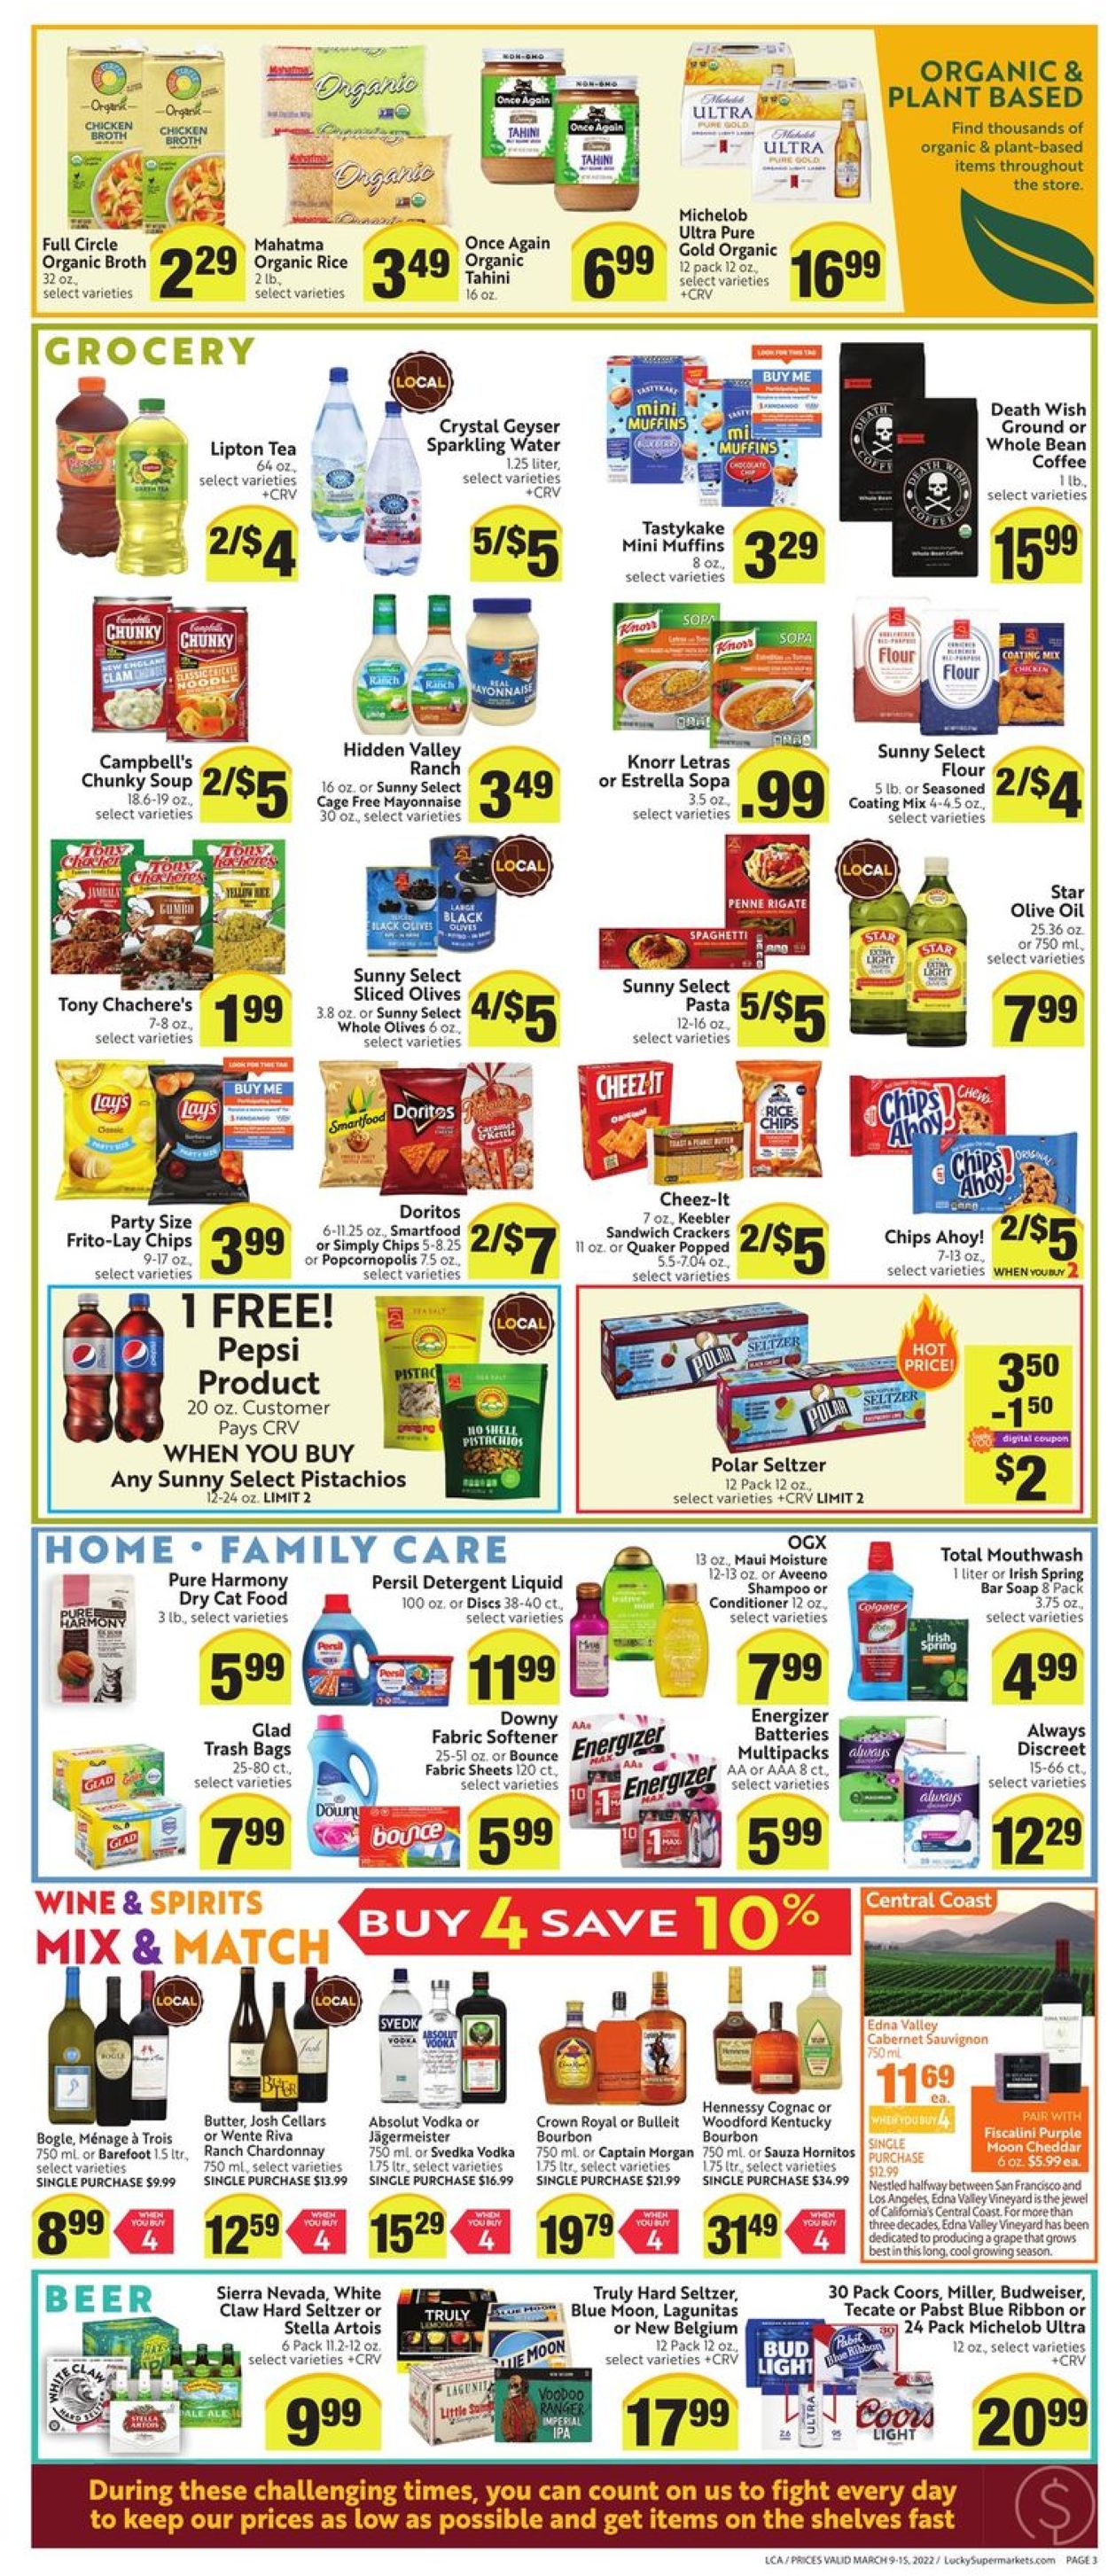 Catalogue Lucky Supermarkets from 03/09/2022